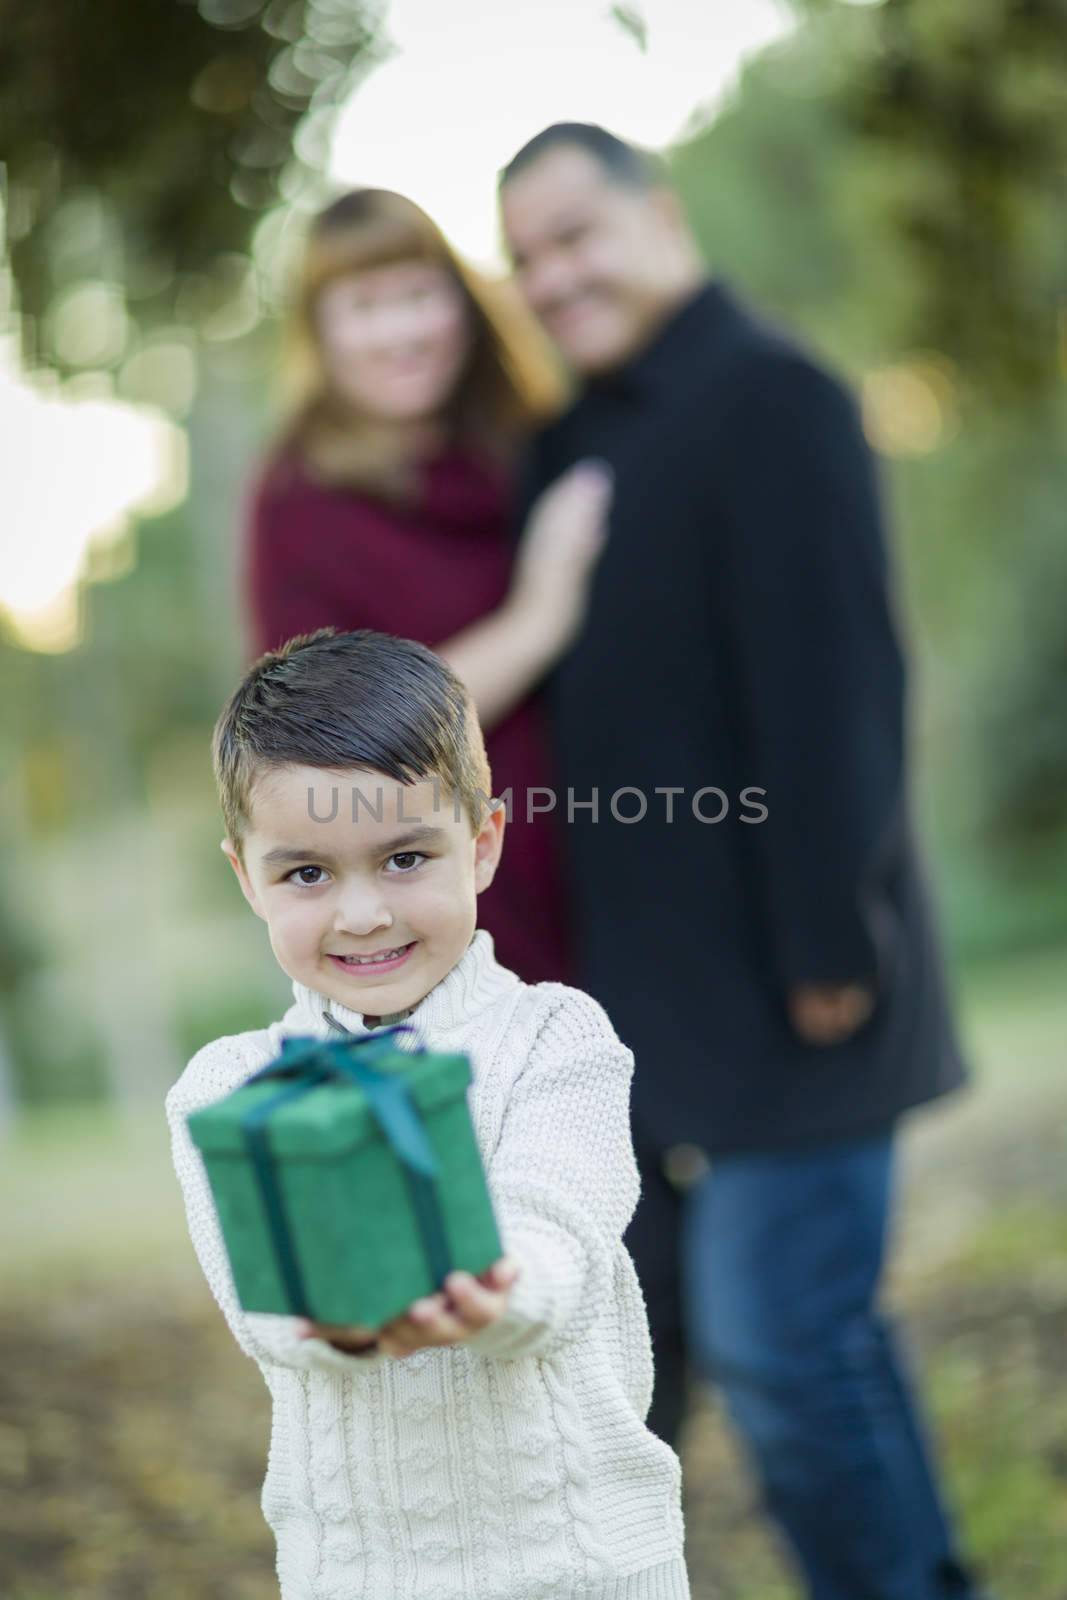 Young Mixed Race Boy Holding Gift In Front with Parents Behind.